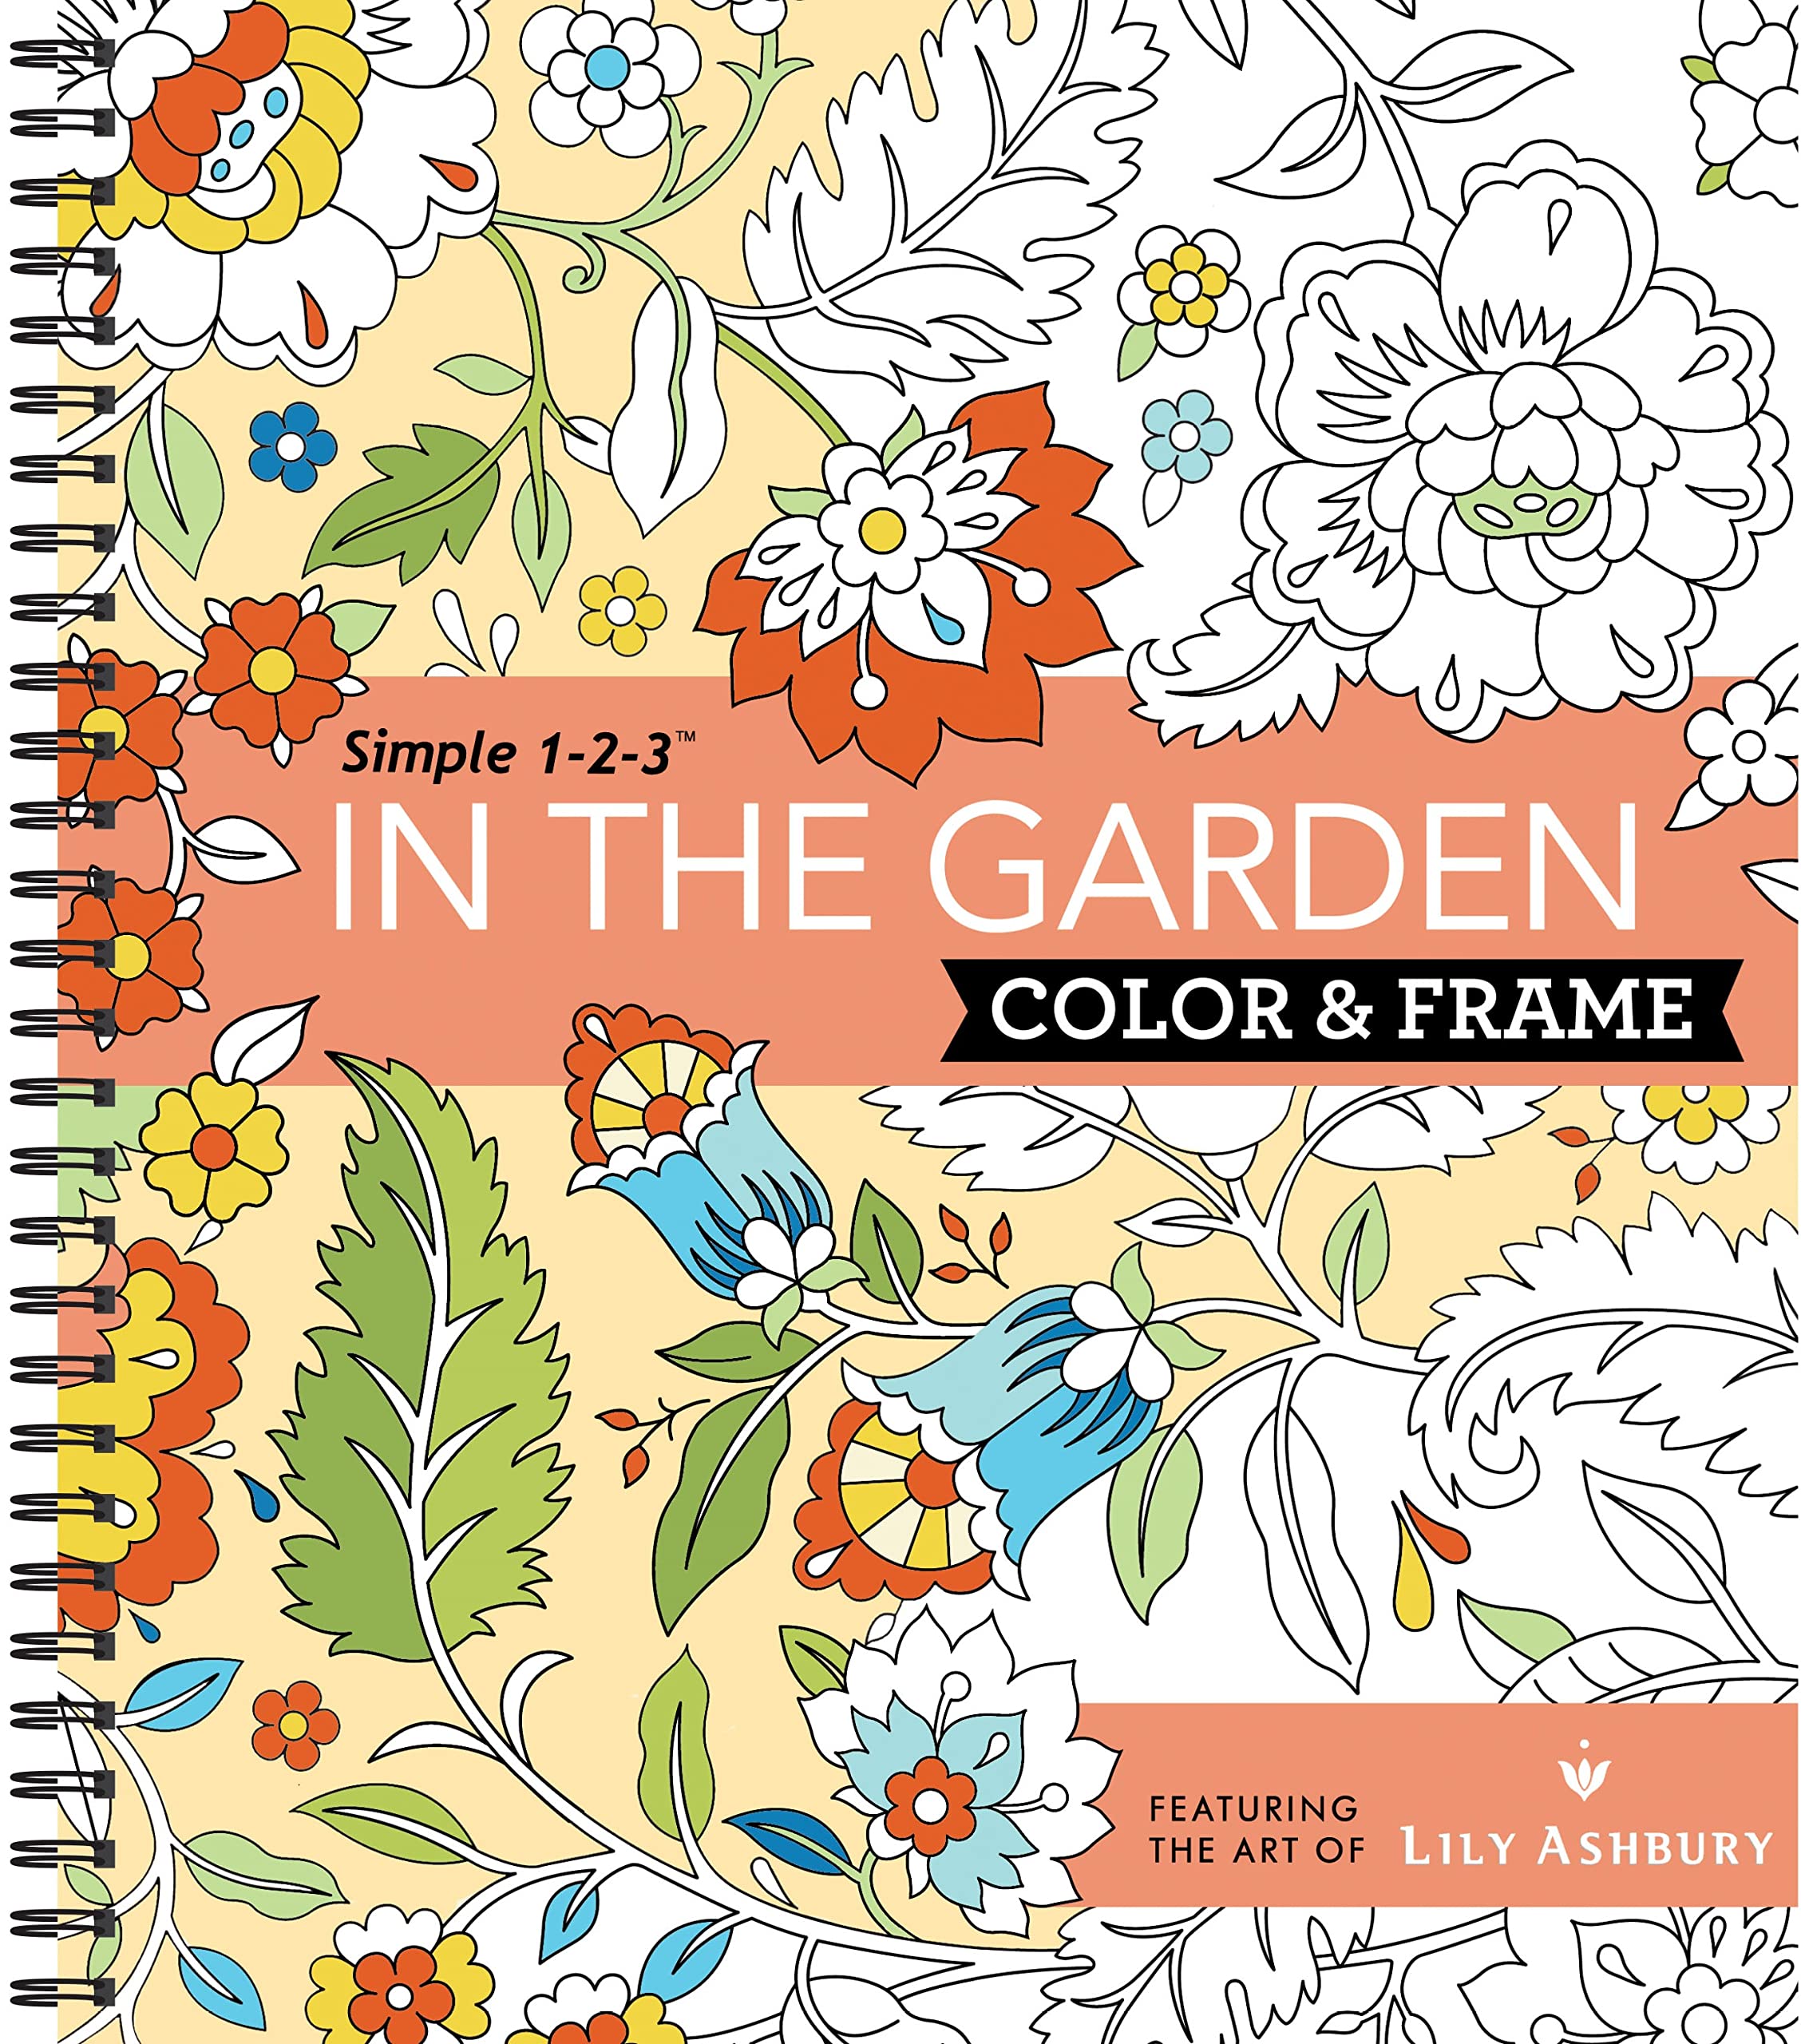 Color & Frame - In the Garden (Adult Coloring Book) by New Seasons